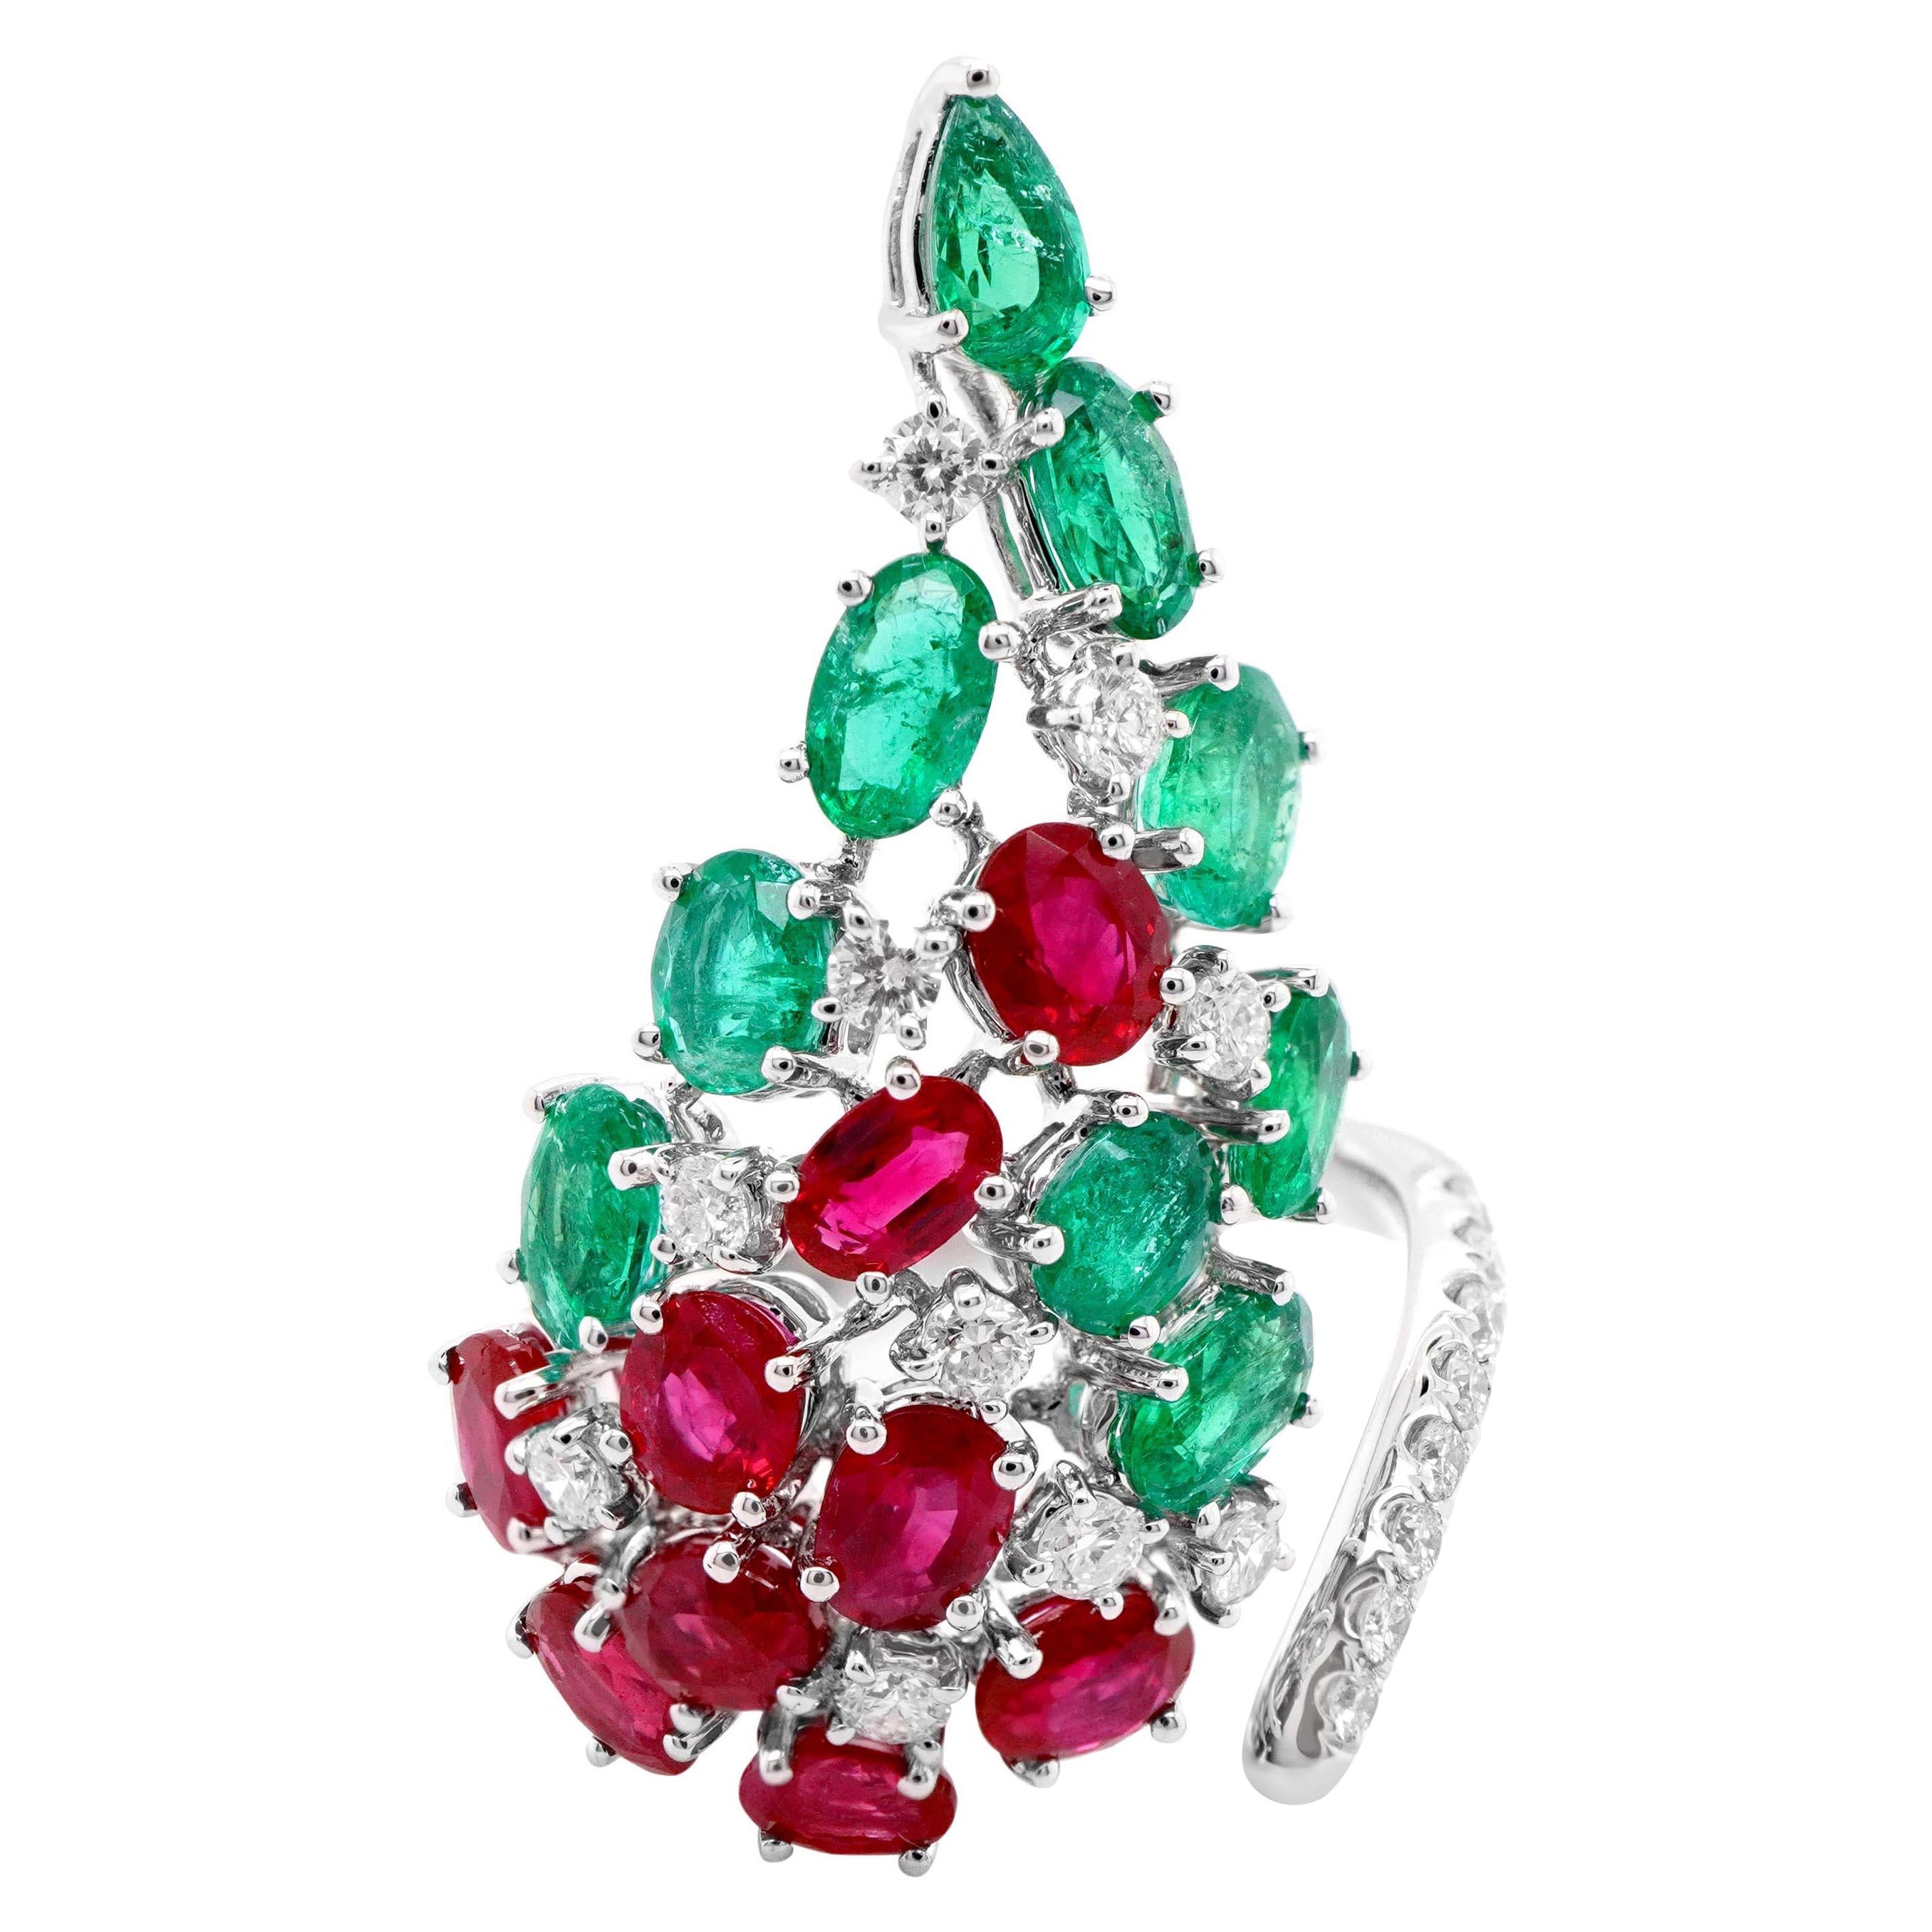 3.88 Carat Vivid Red Burma Ruby Colombian Emerald Christmas Color Cocktail Ring